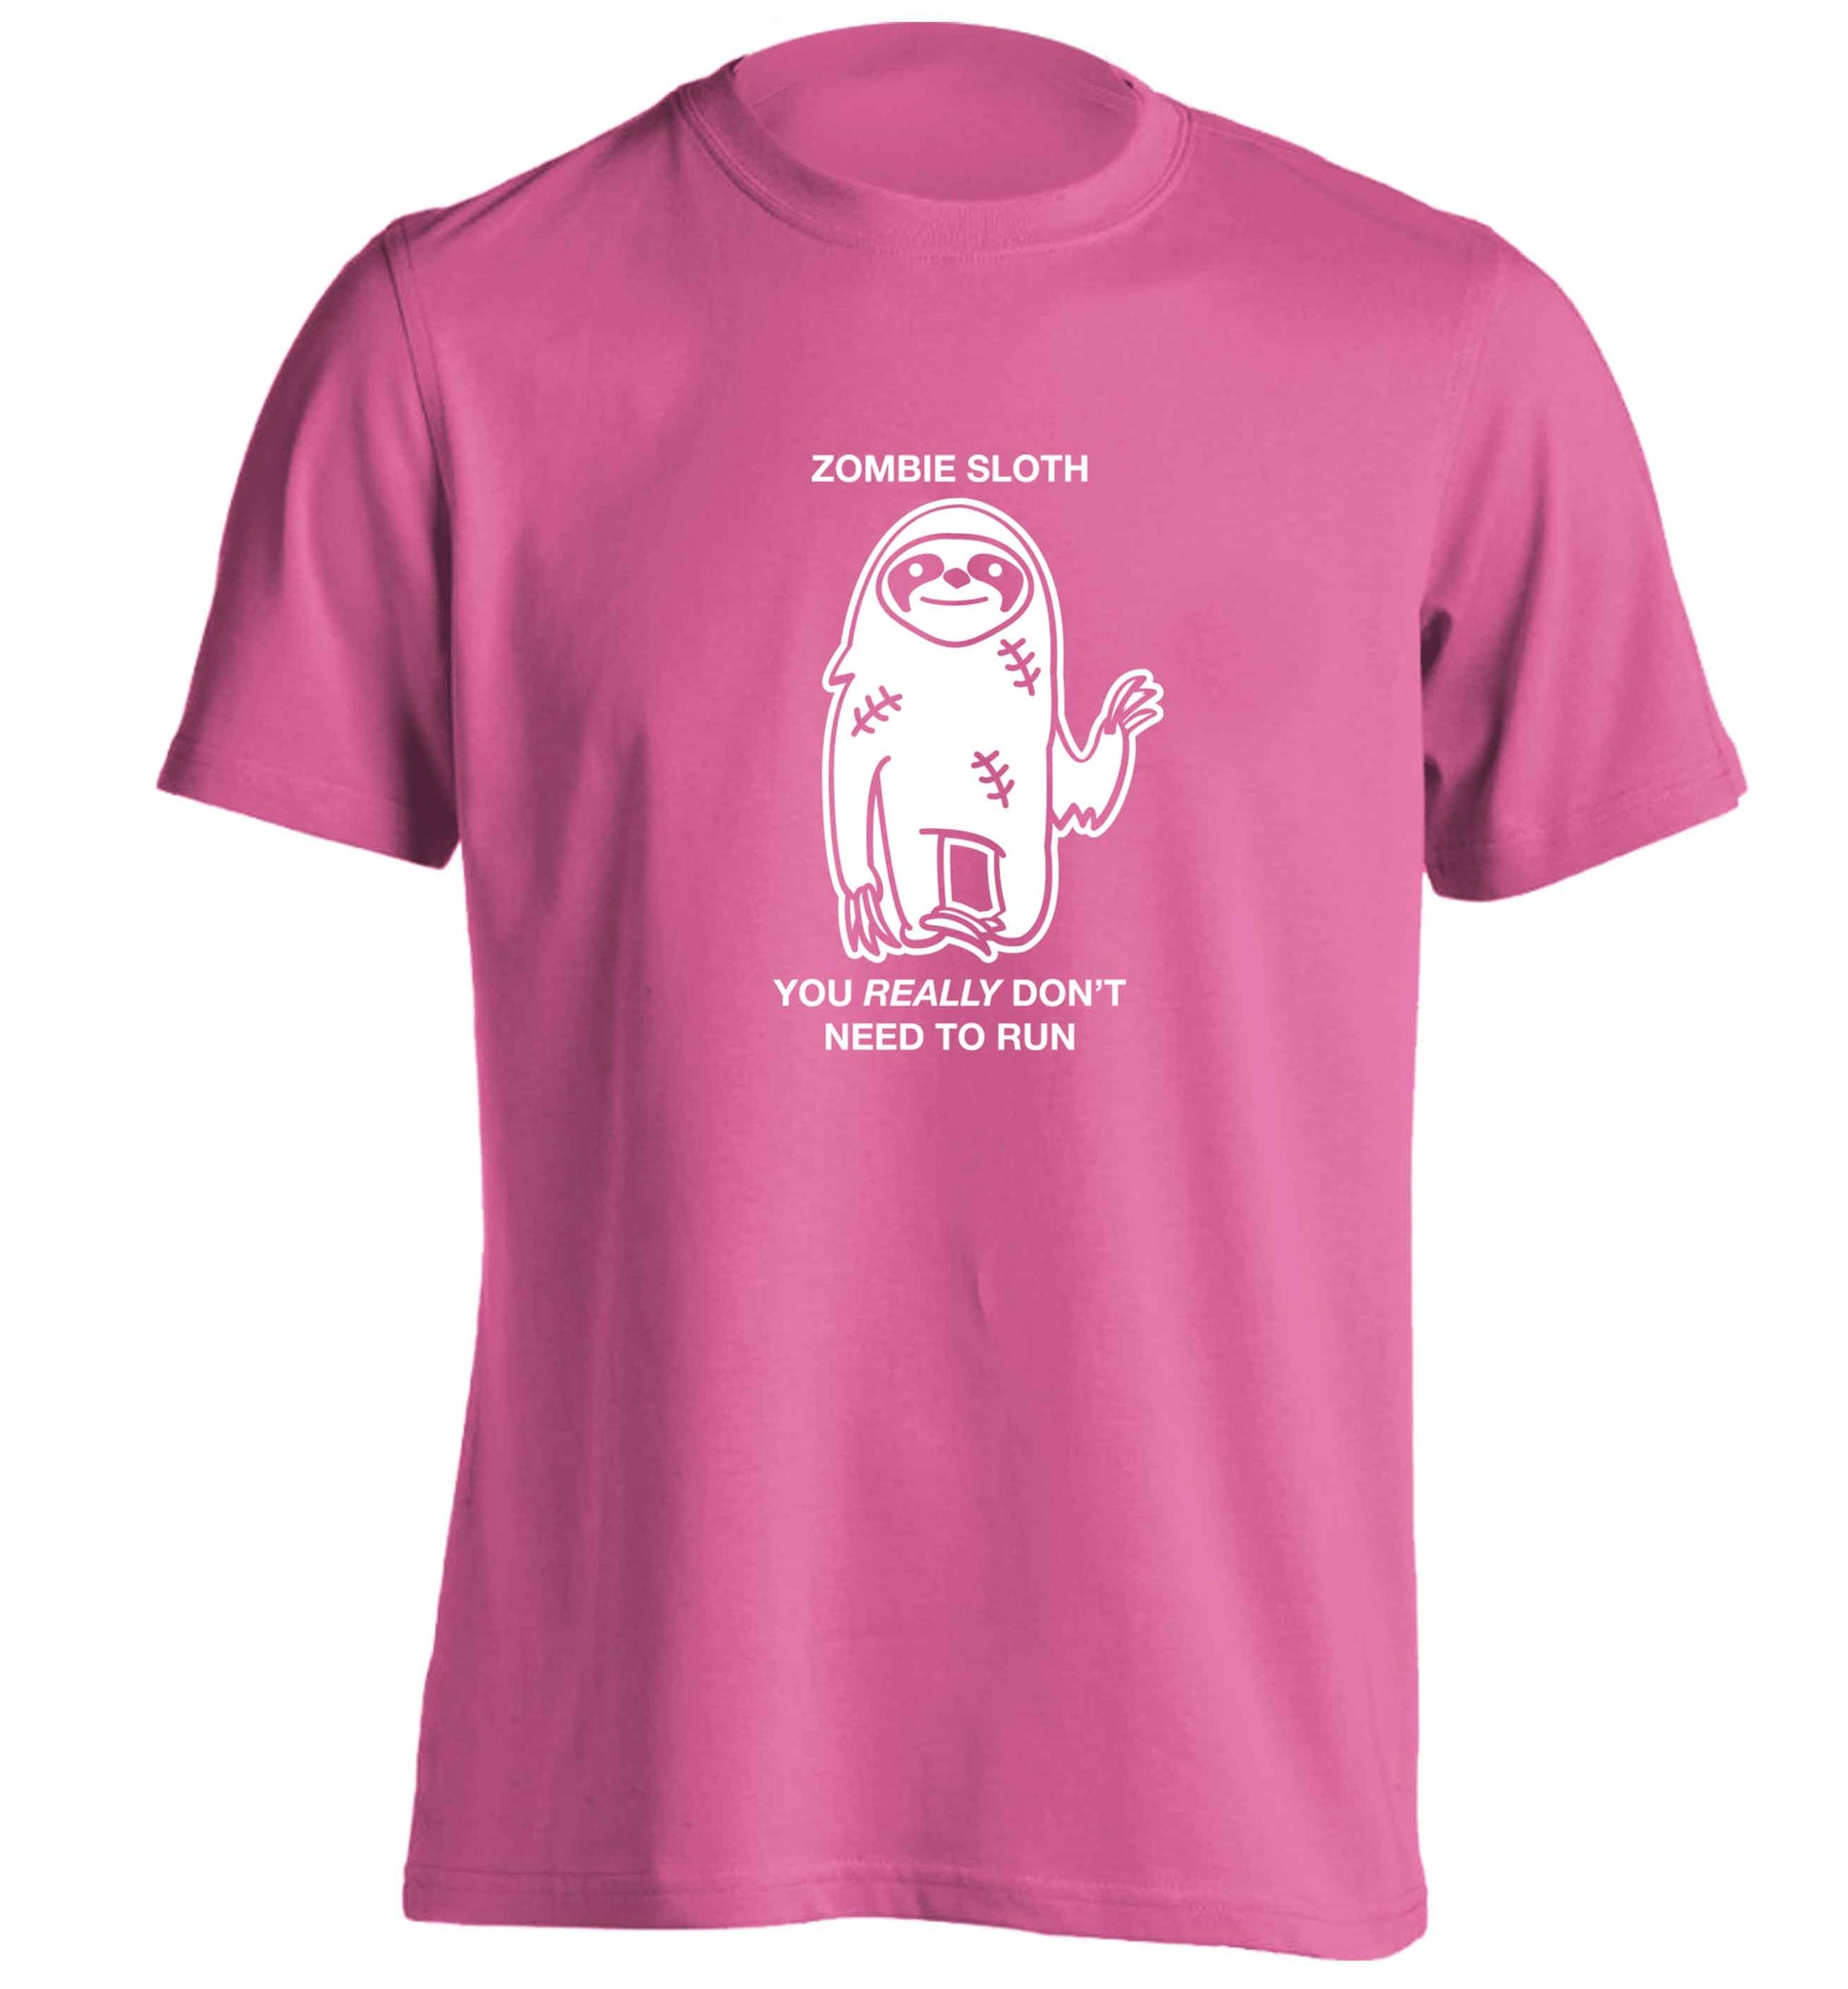 Zombie sloth you really don't need to run adults unisex pink Tshirt 2XL